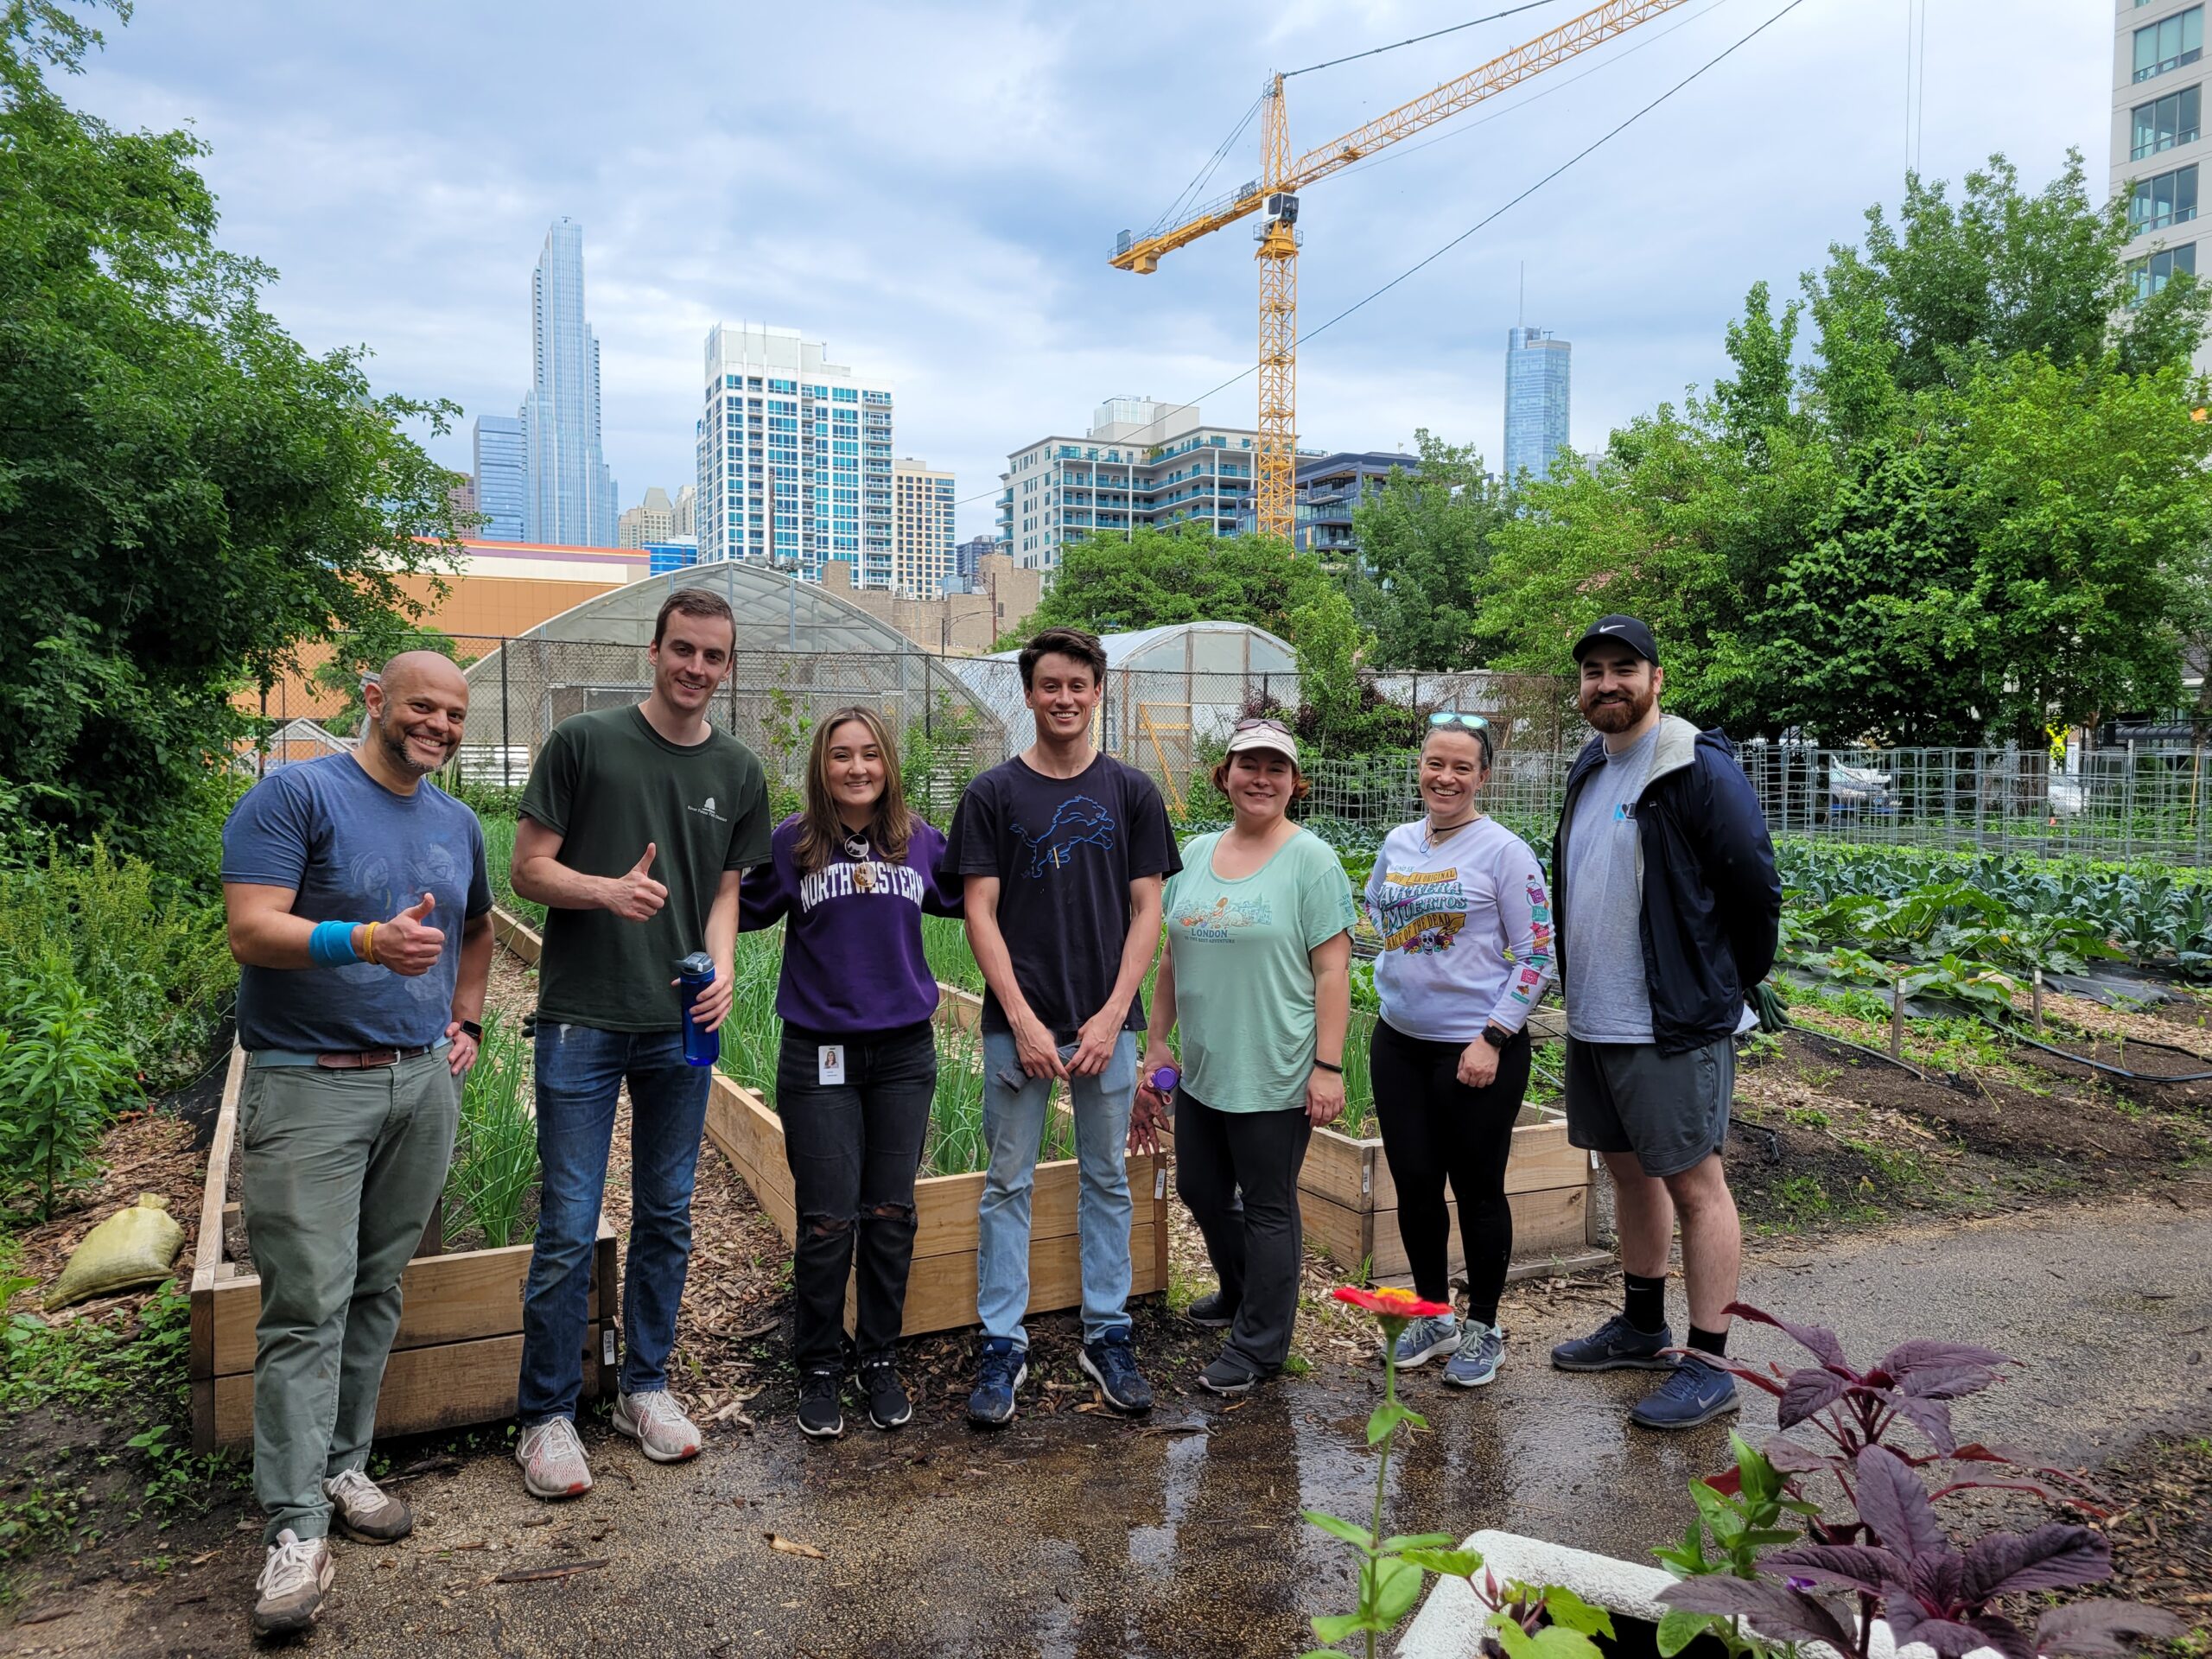 Credico volunteers pose for a photo after volunteering at Chicago Lights Urban farm